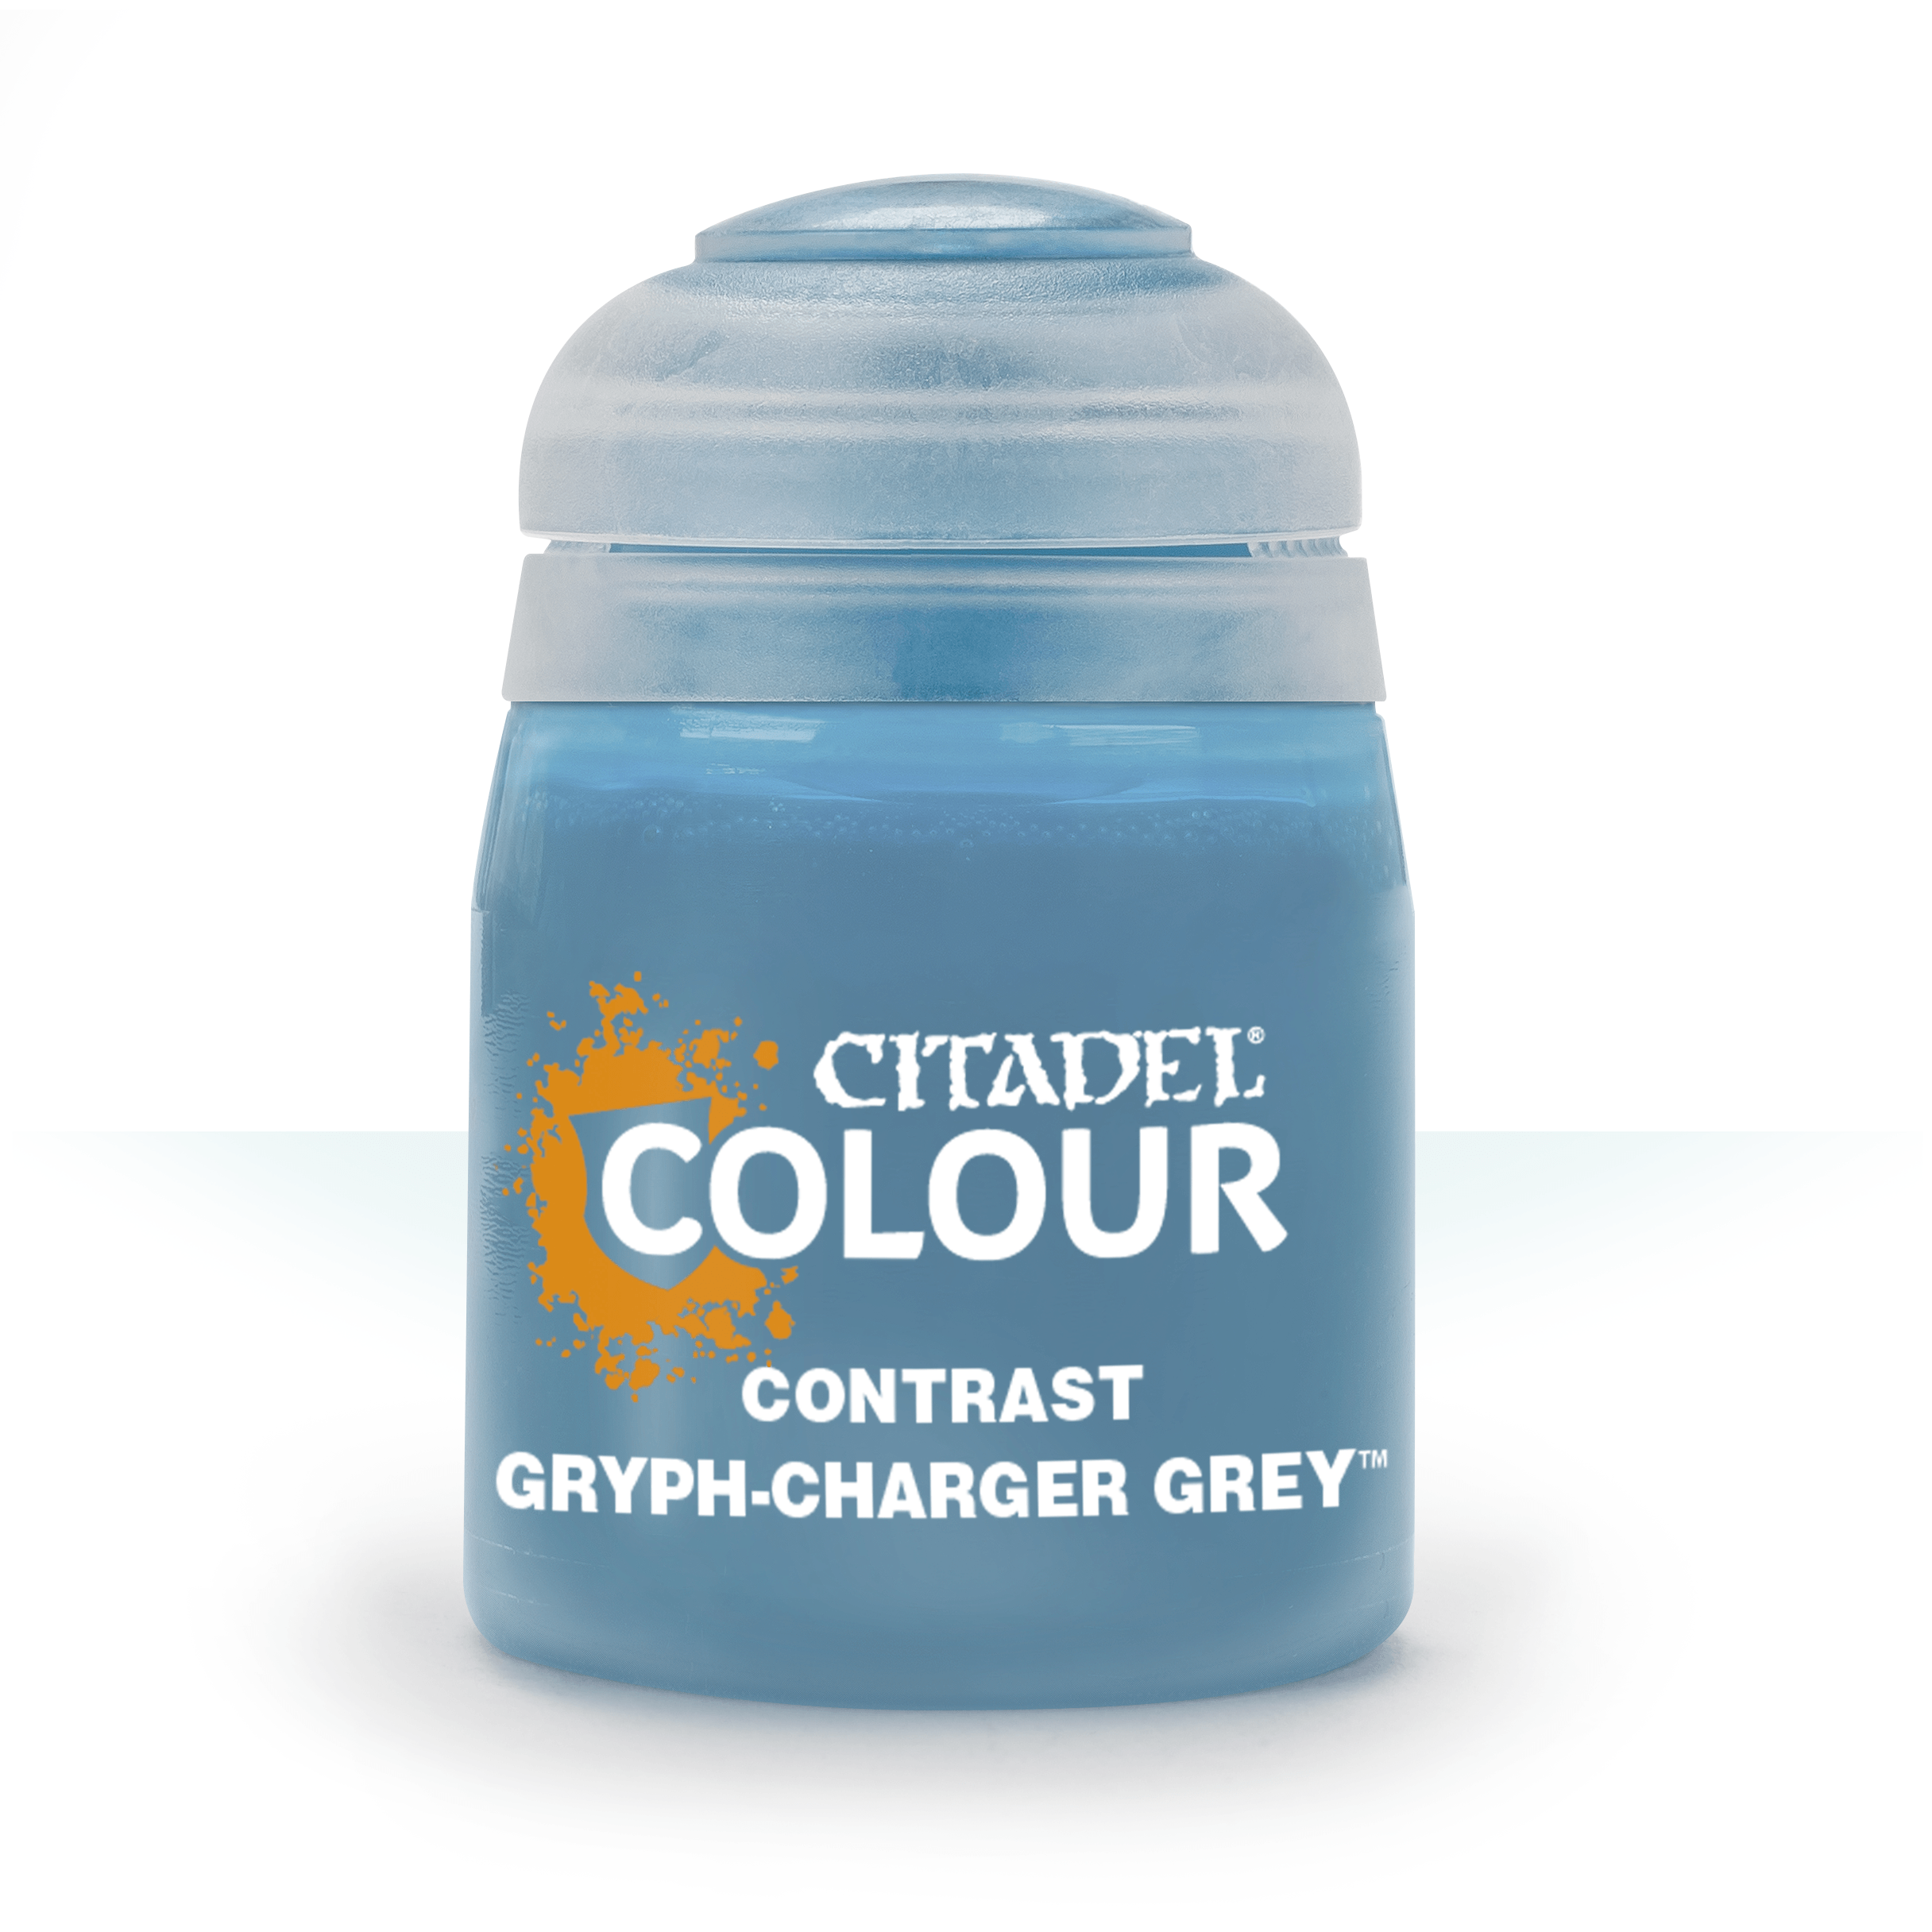 CITADEL CONTRAST GRYPH-CHARGER GREY | Impulse Games and Hobbies